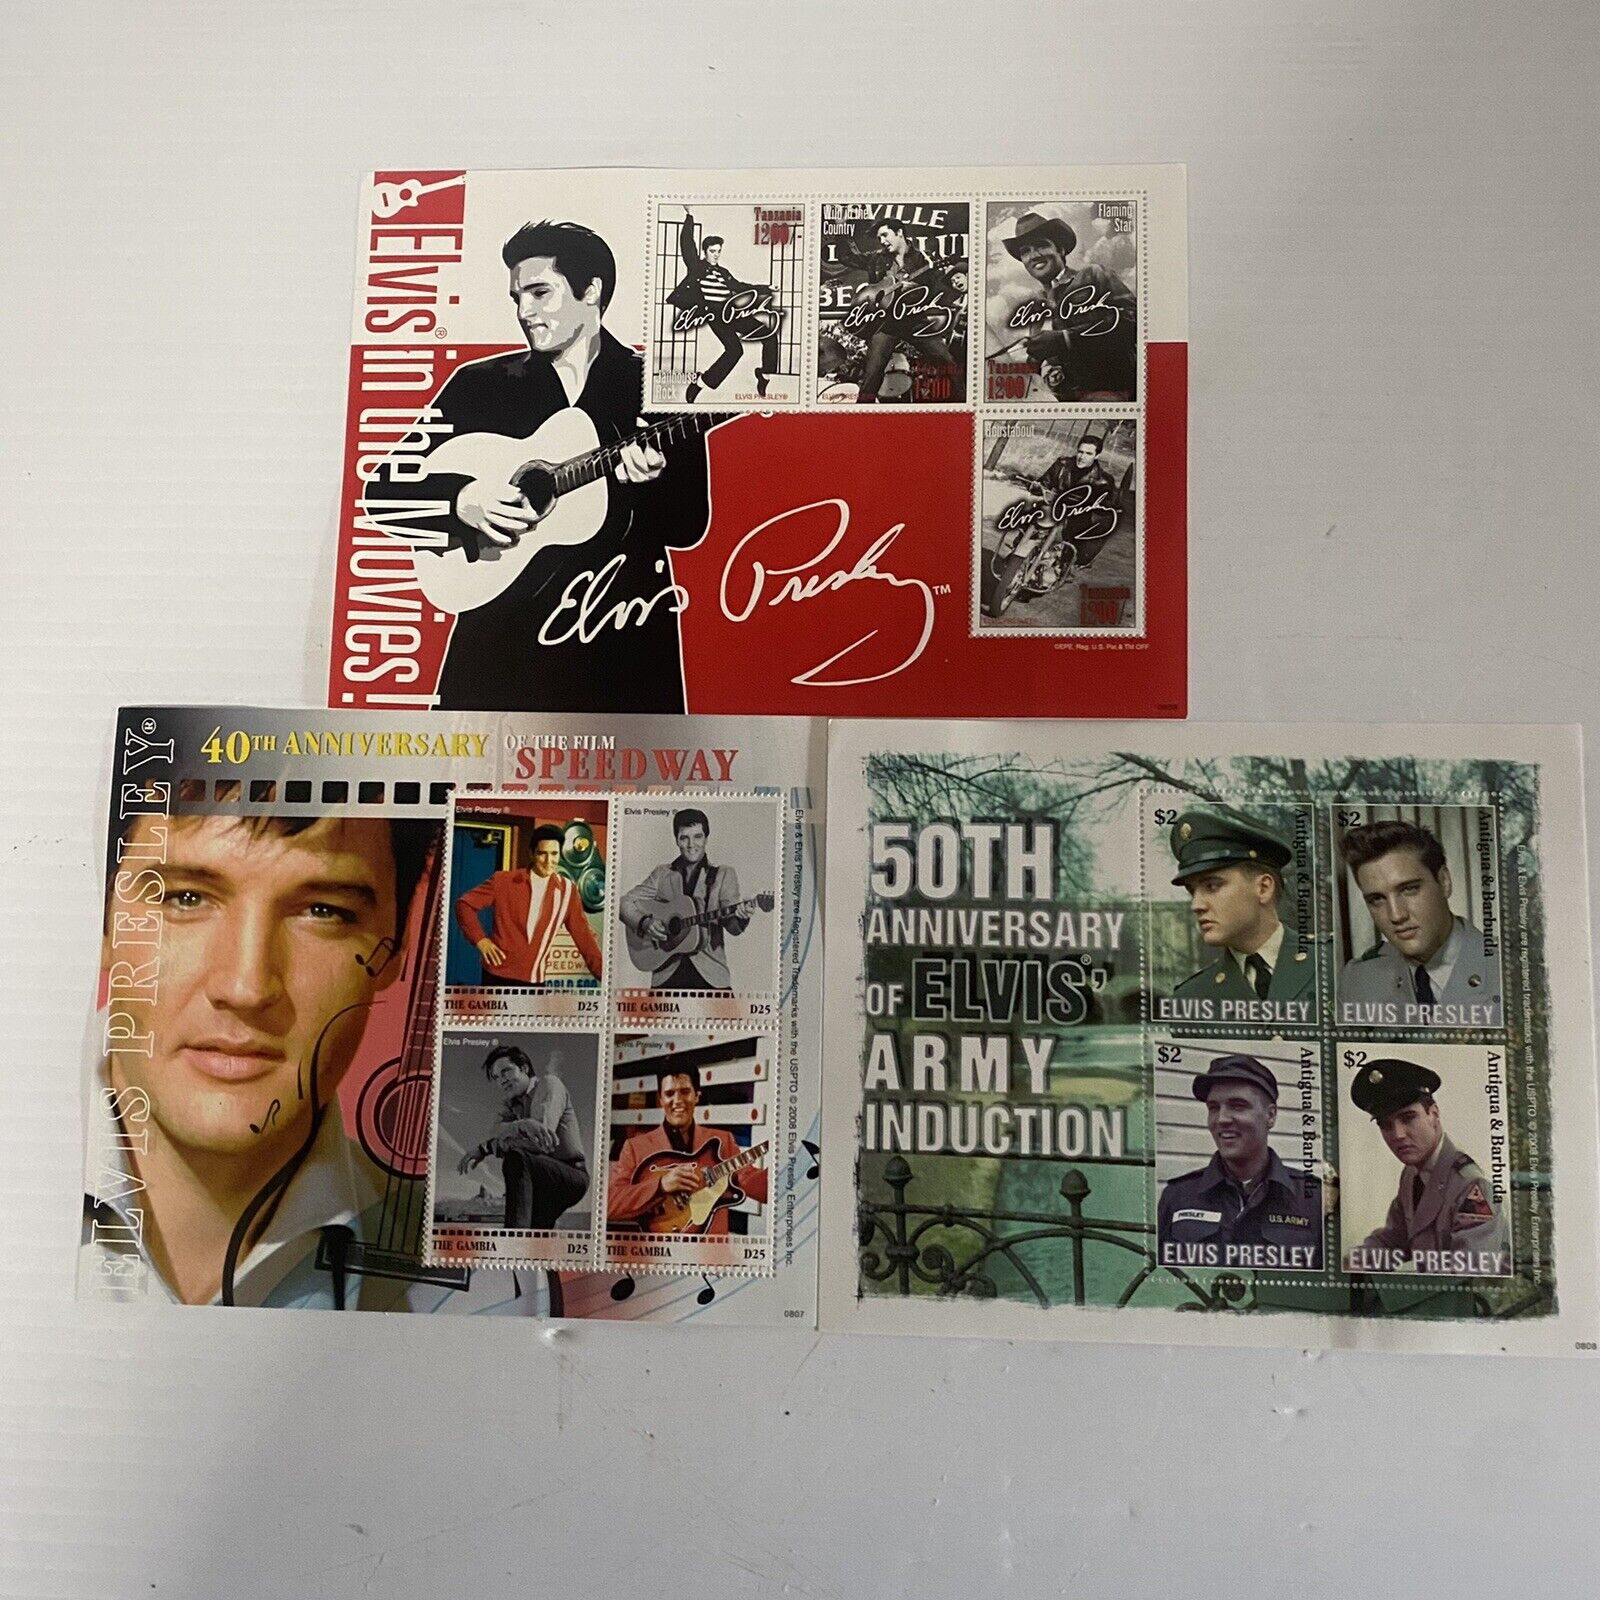 Lot of 3 Elvis Presley Stamps Collection Mystic Stamp (A) Без бренда